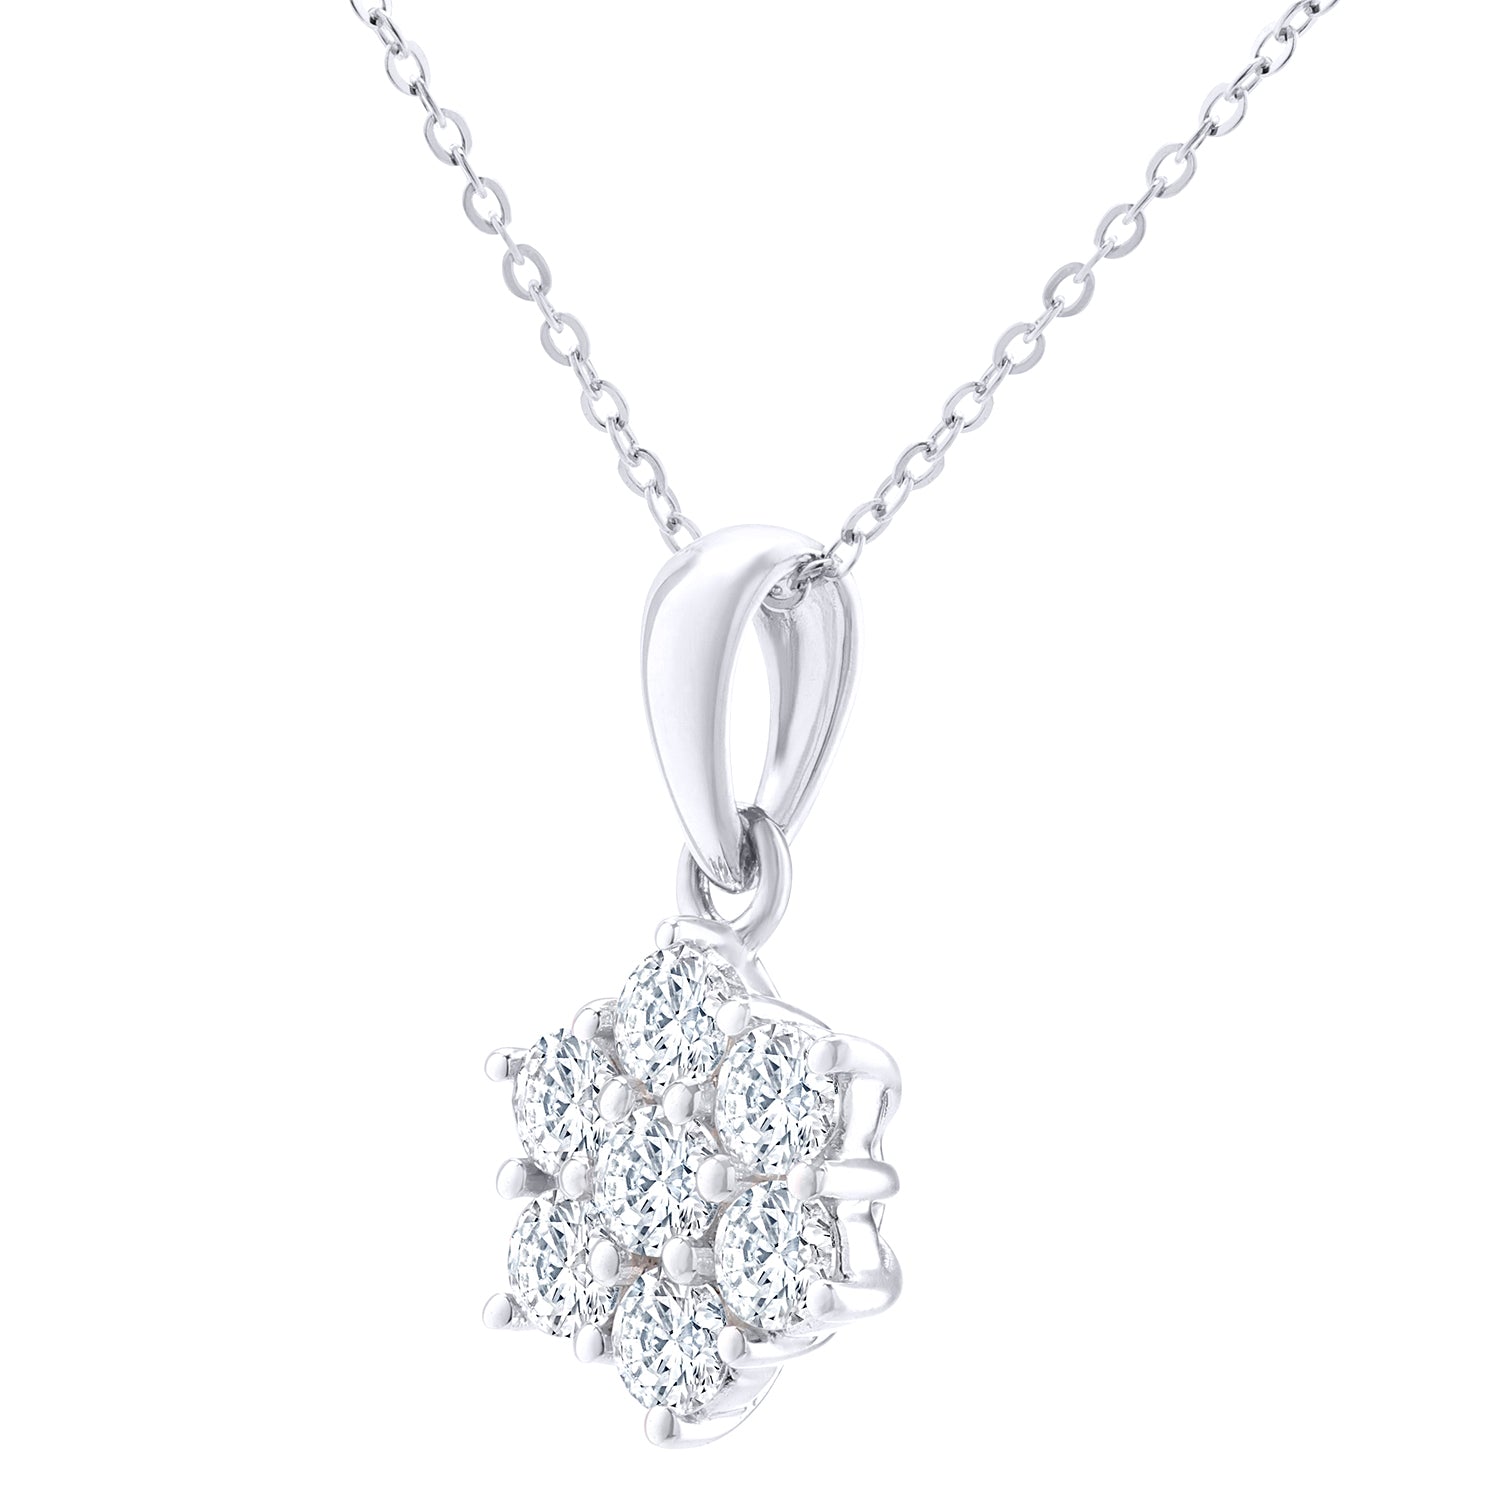 18ct White Gold  1ct Diamond Solitaire Pendant Necklace 18 inch - PP0AXL1892W18HSI